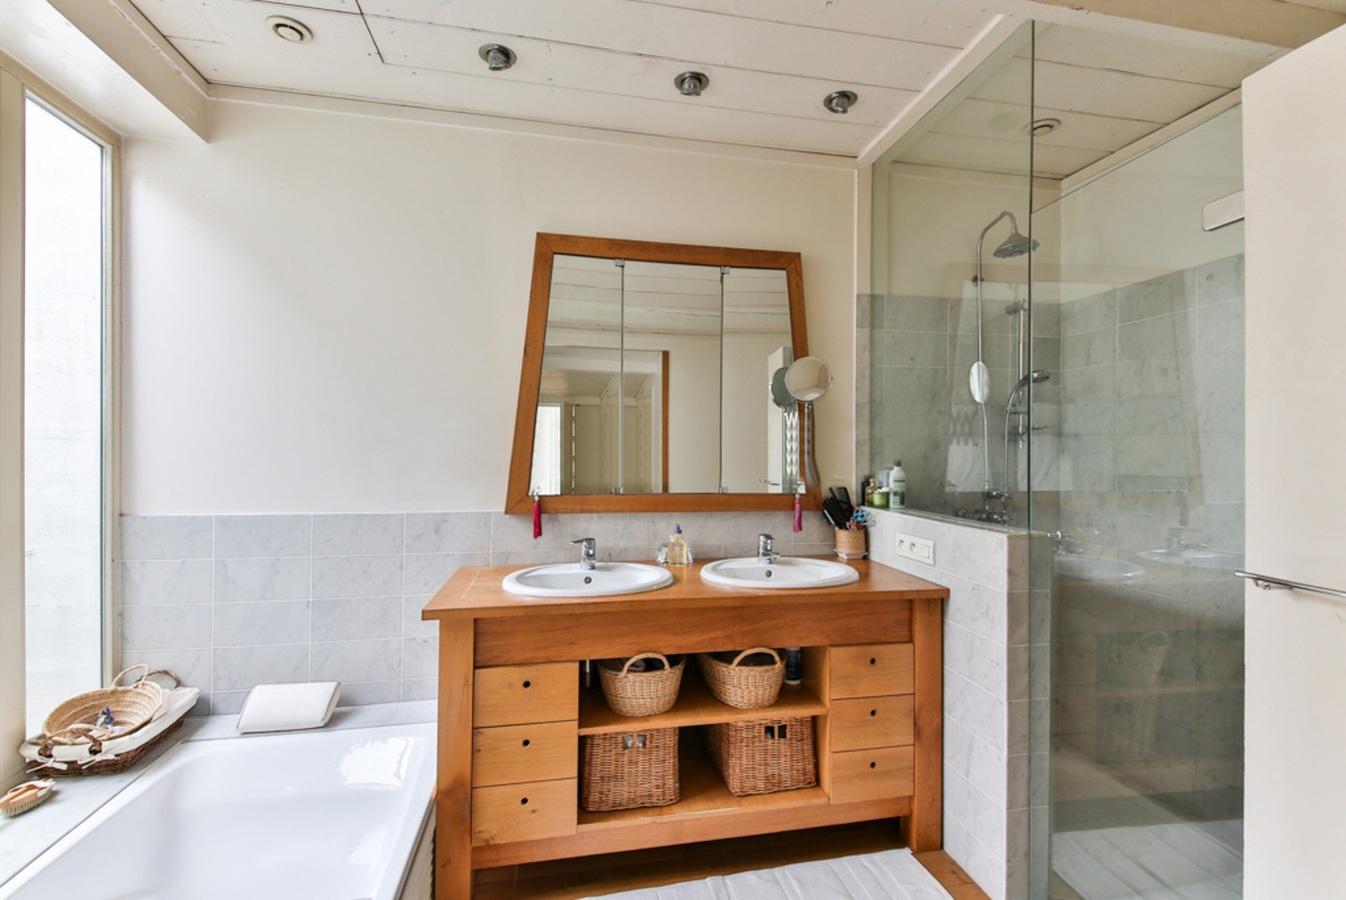 An up-to-date bathroom featuring a glass shower and wooden vanity.